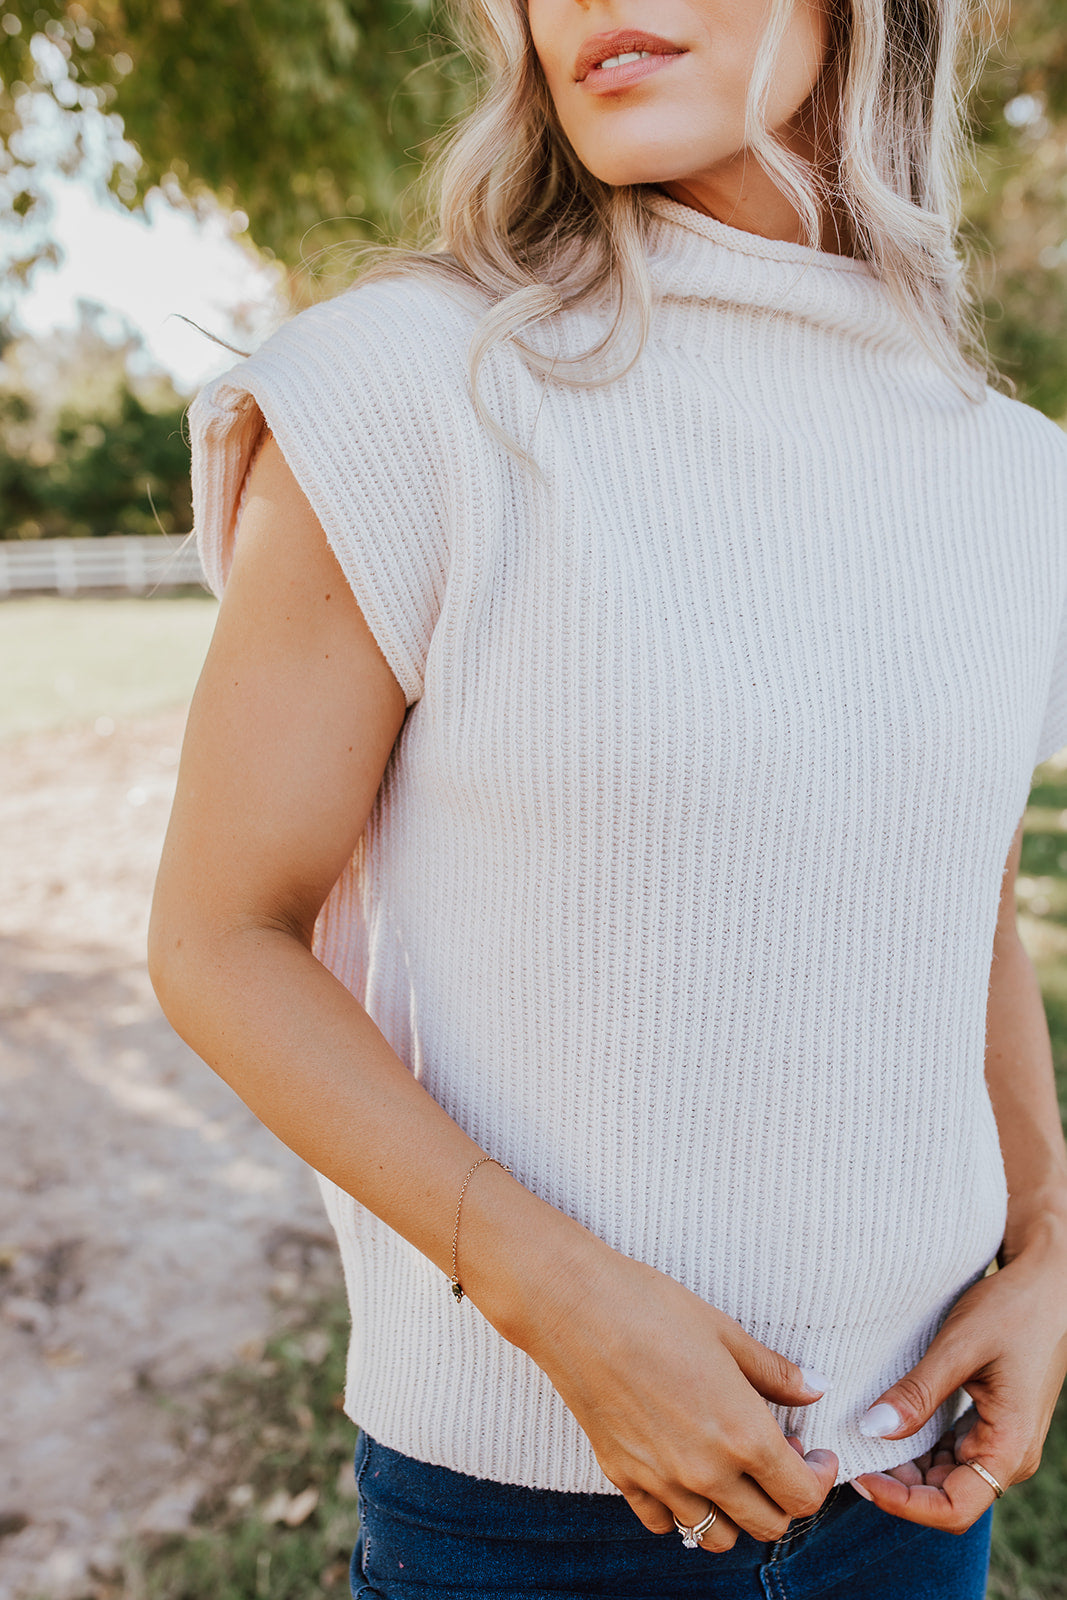 THE LOOKING CHIC SWEATER VEST IN CREAM